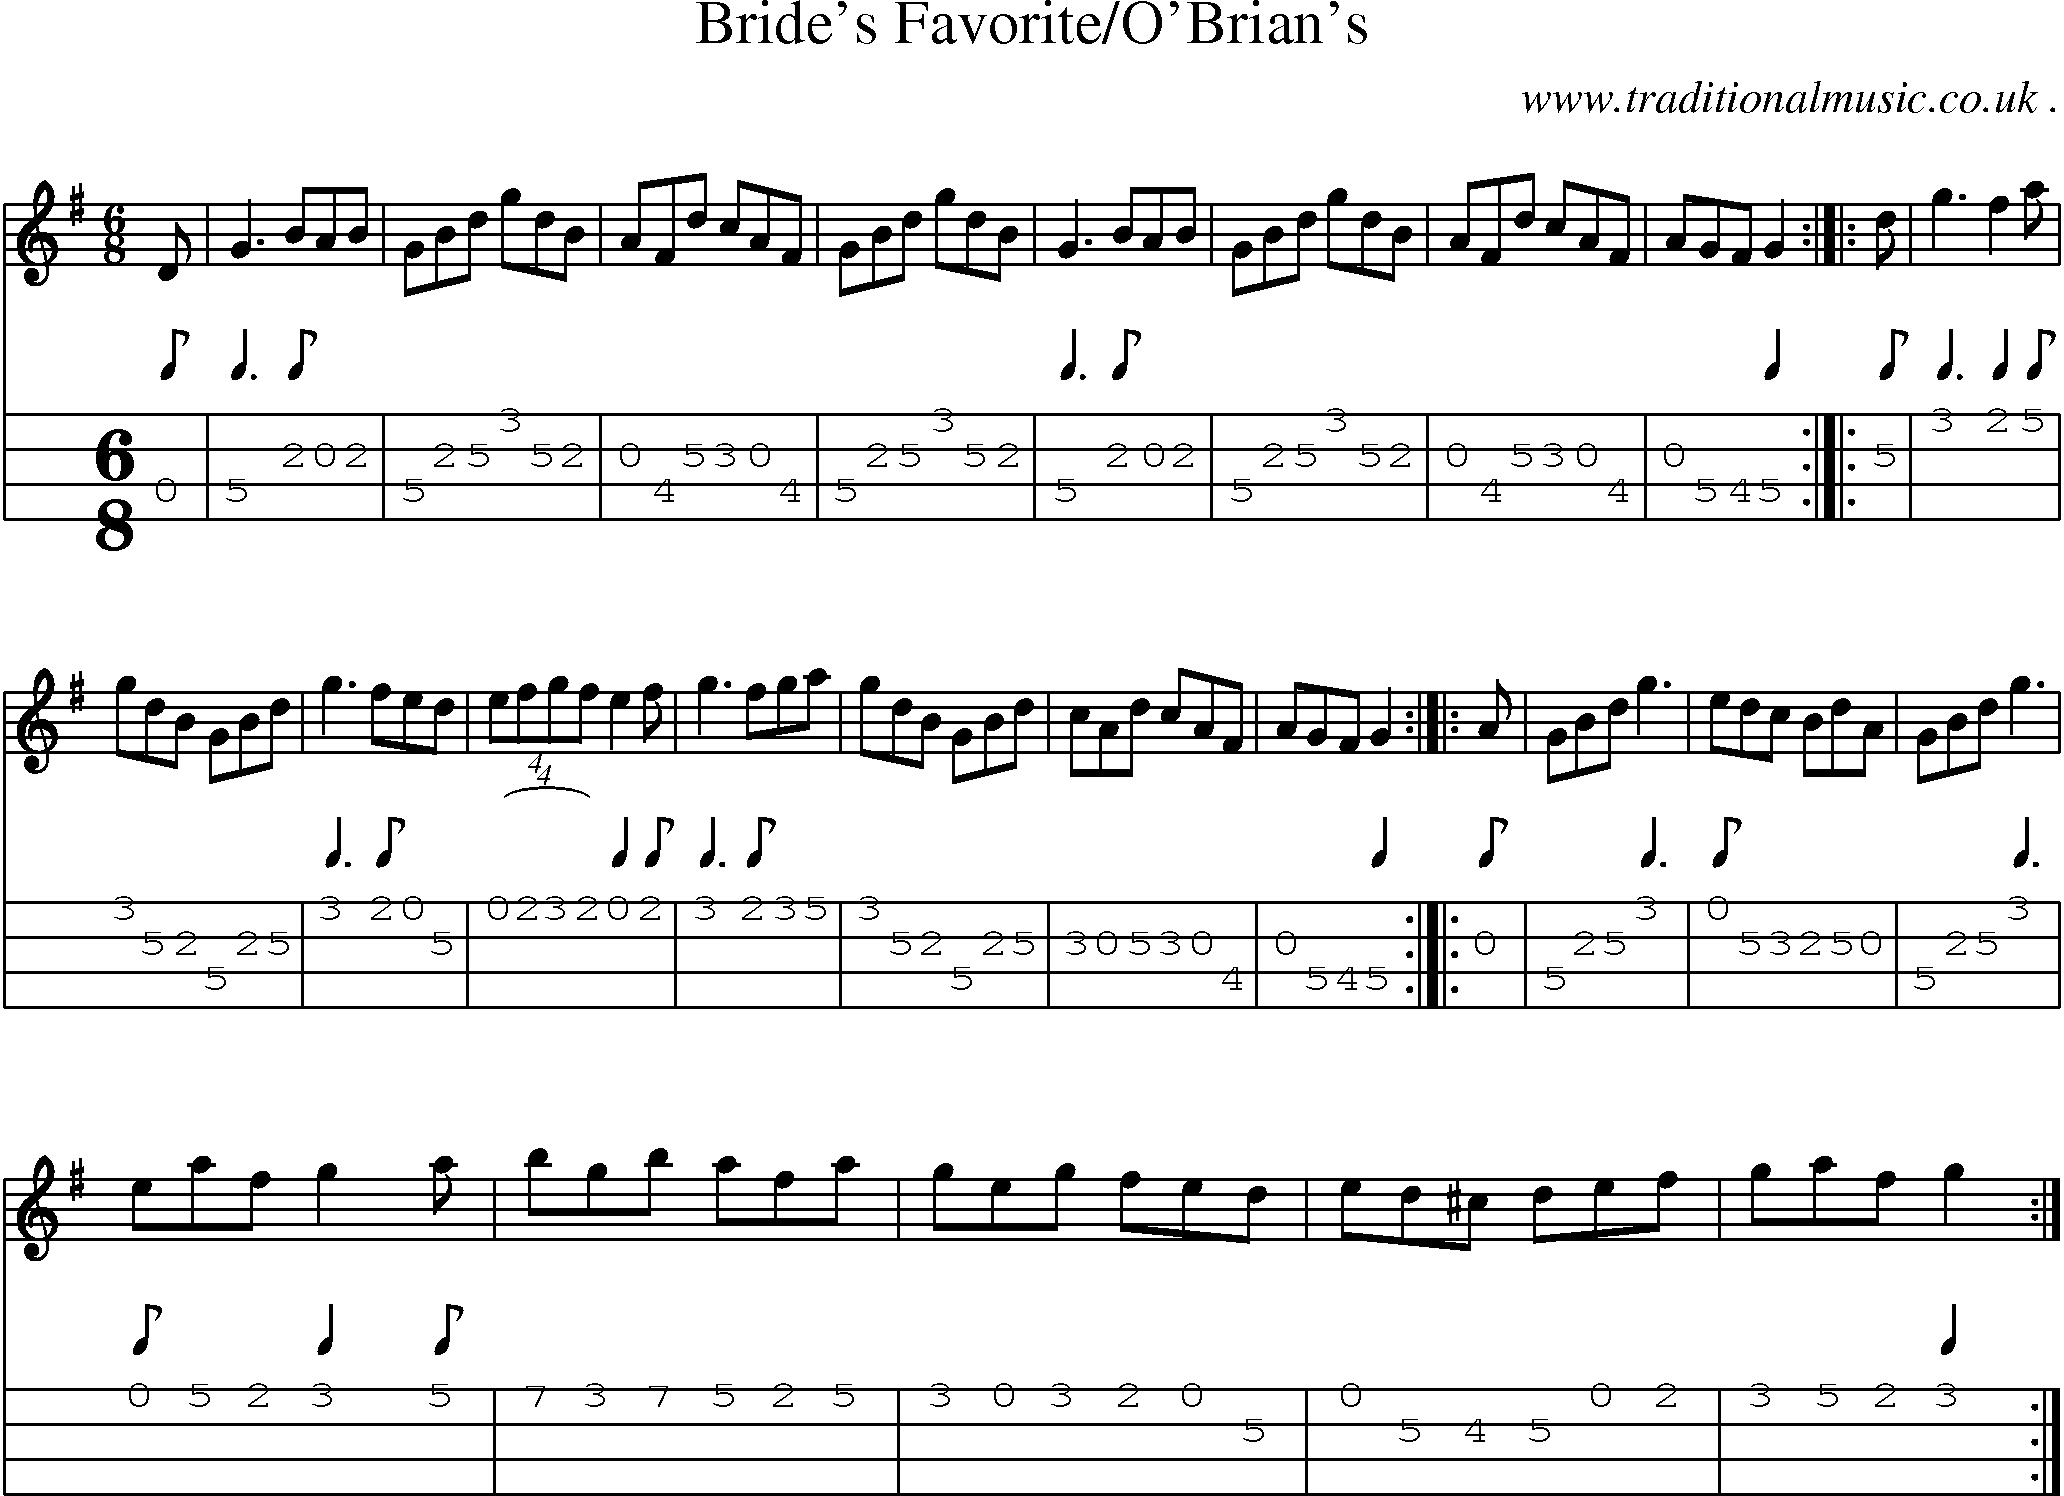 Sheet-Music and Mandolin Tabs for Brides Favoriteobrians